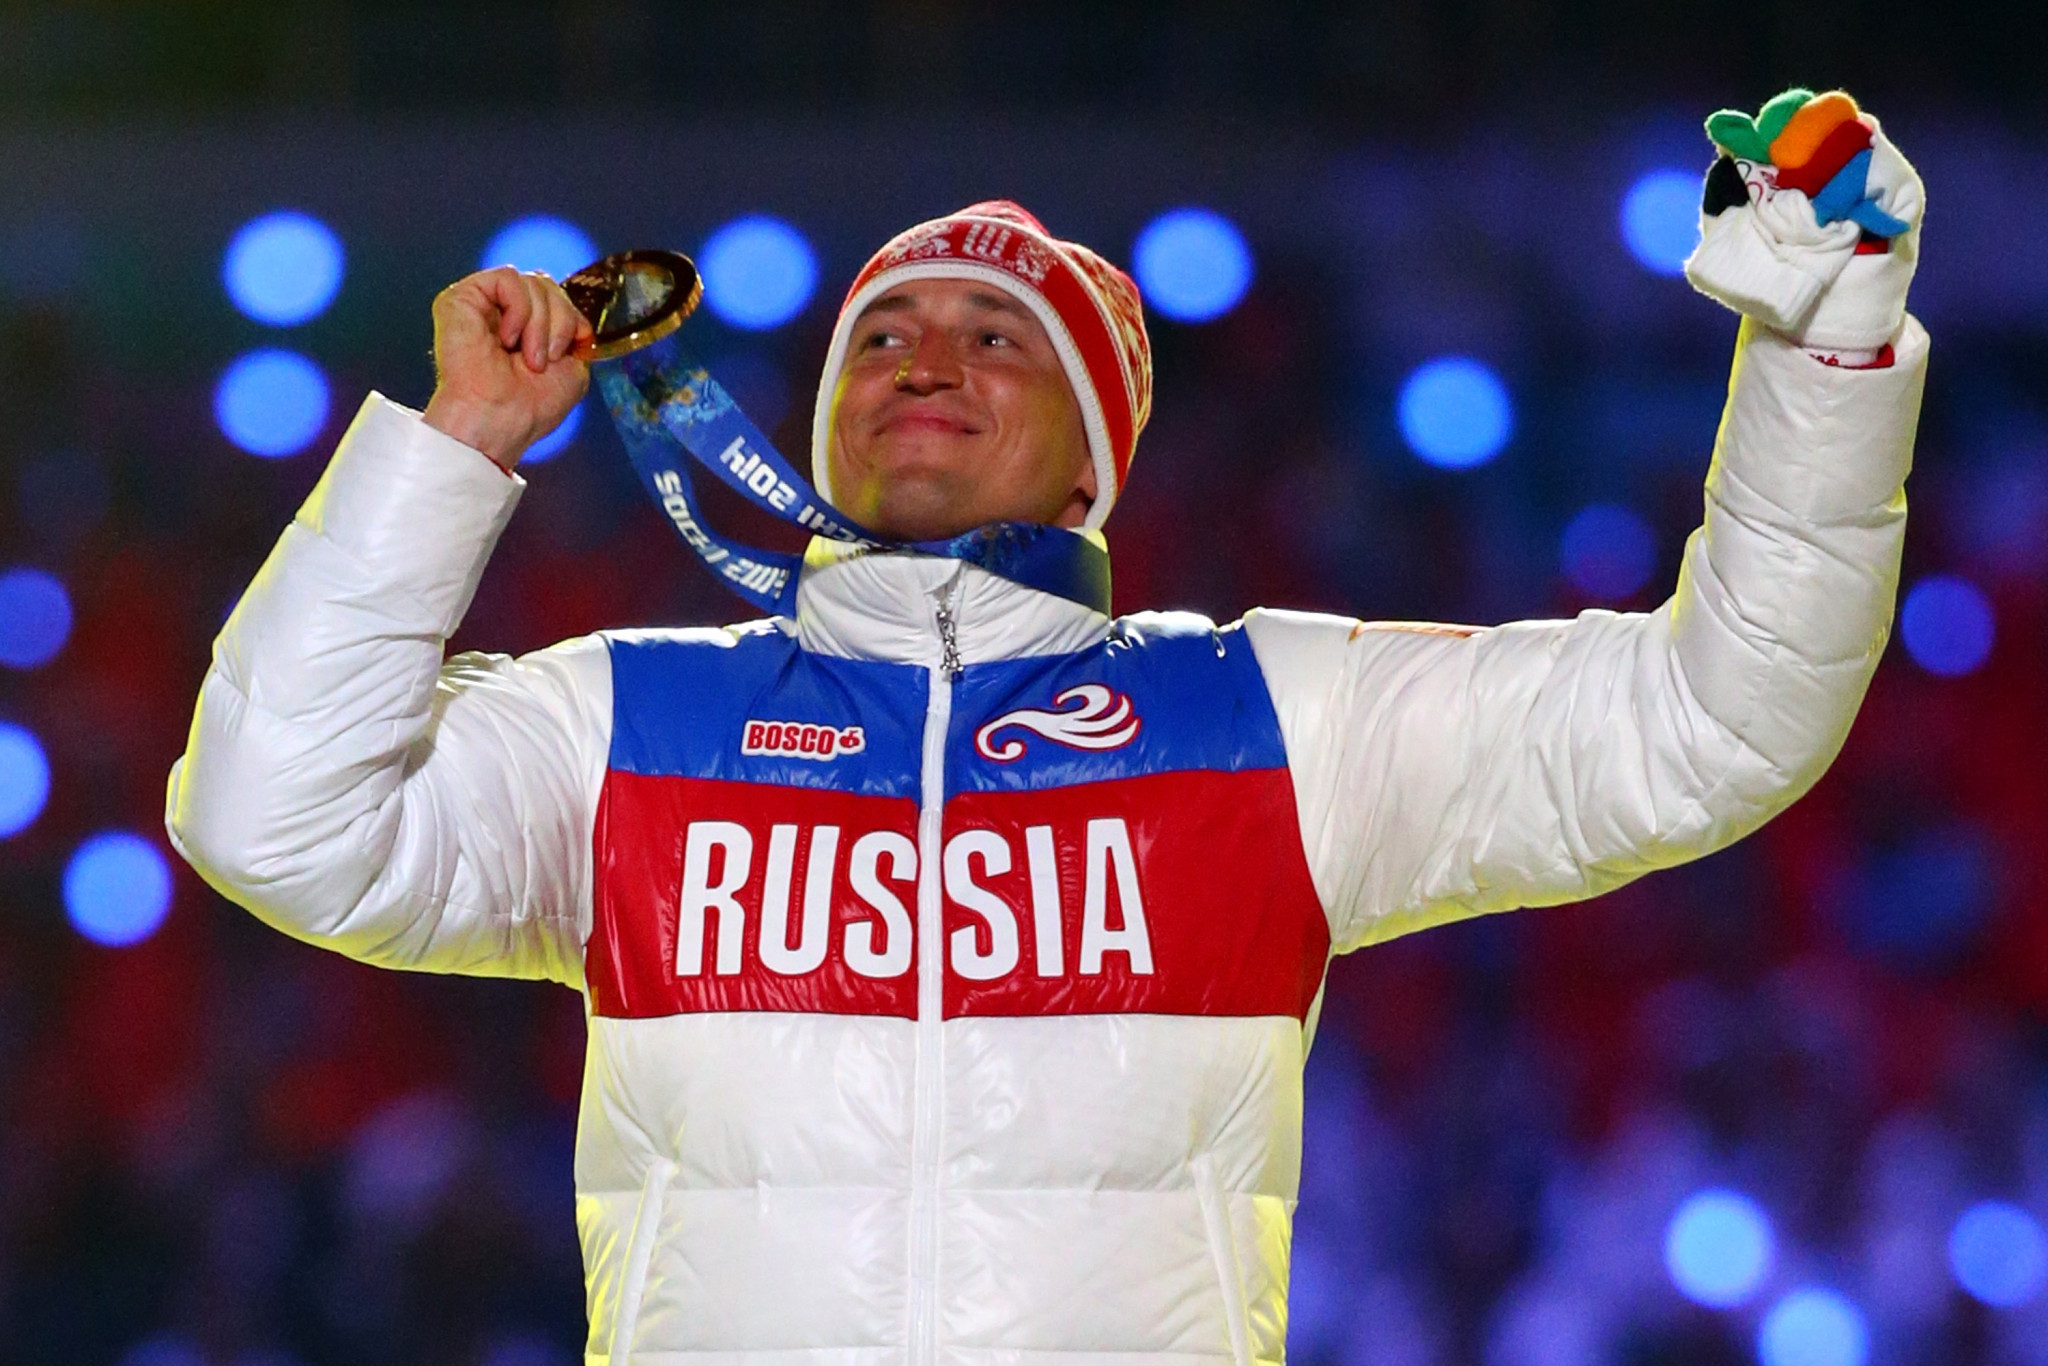 Alexander Legkov celebrates Olympic gold at Sochi 2014, a medal which was taken from him before being reinstated ©Getty Images